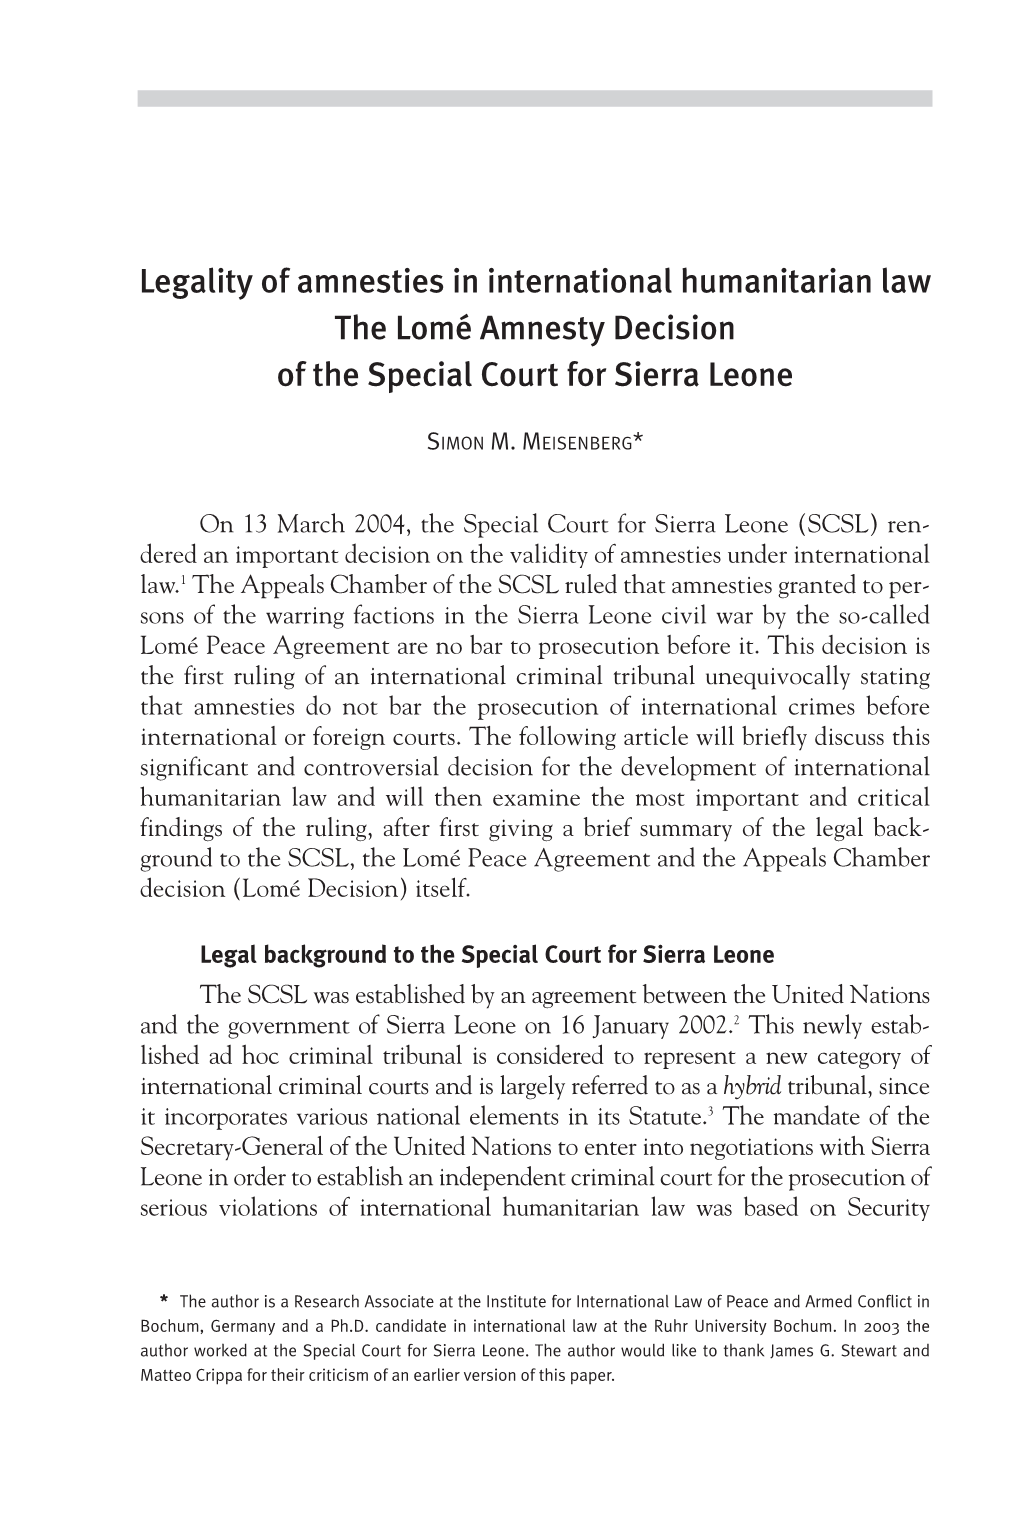 Legality of Amnesties in International Humanitarian Law the Lomé Amnesty Decision of the Special Court for Sierra Leone